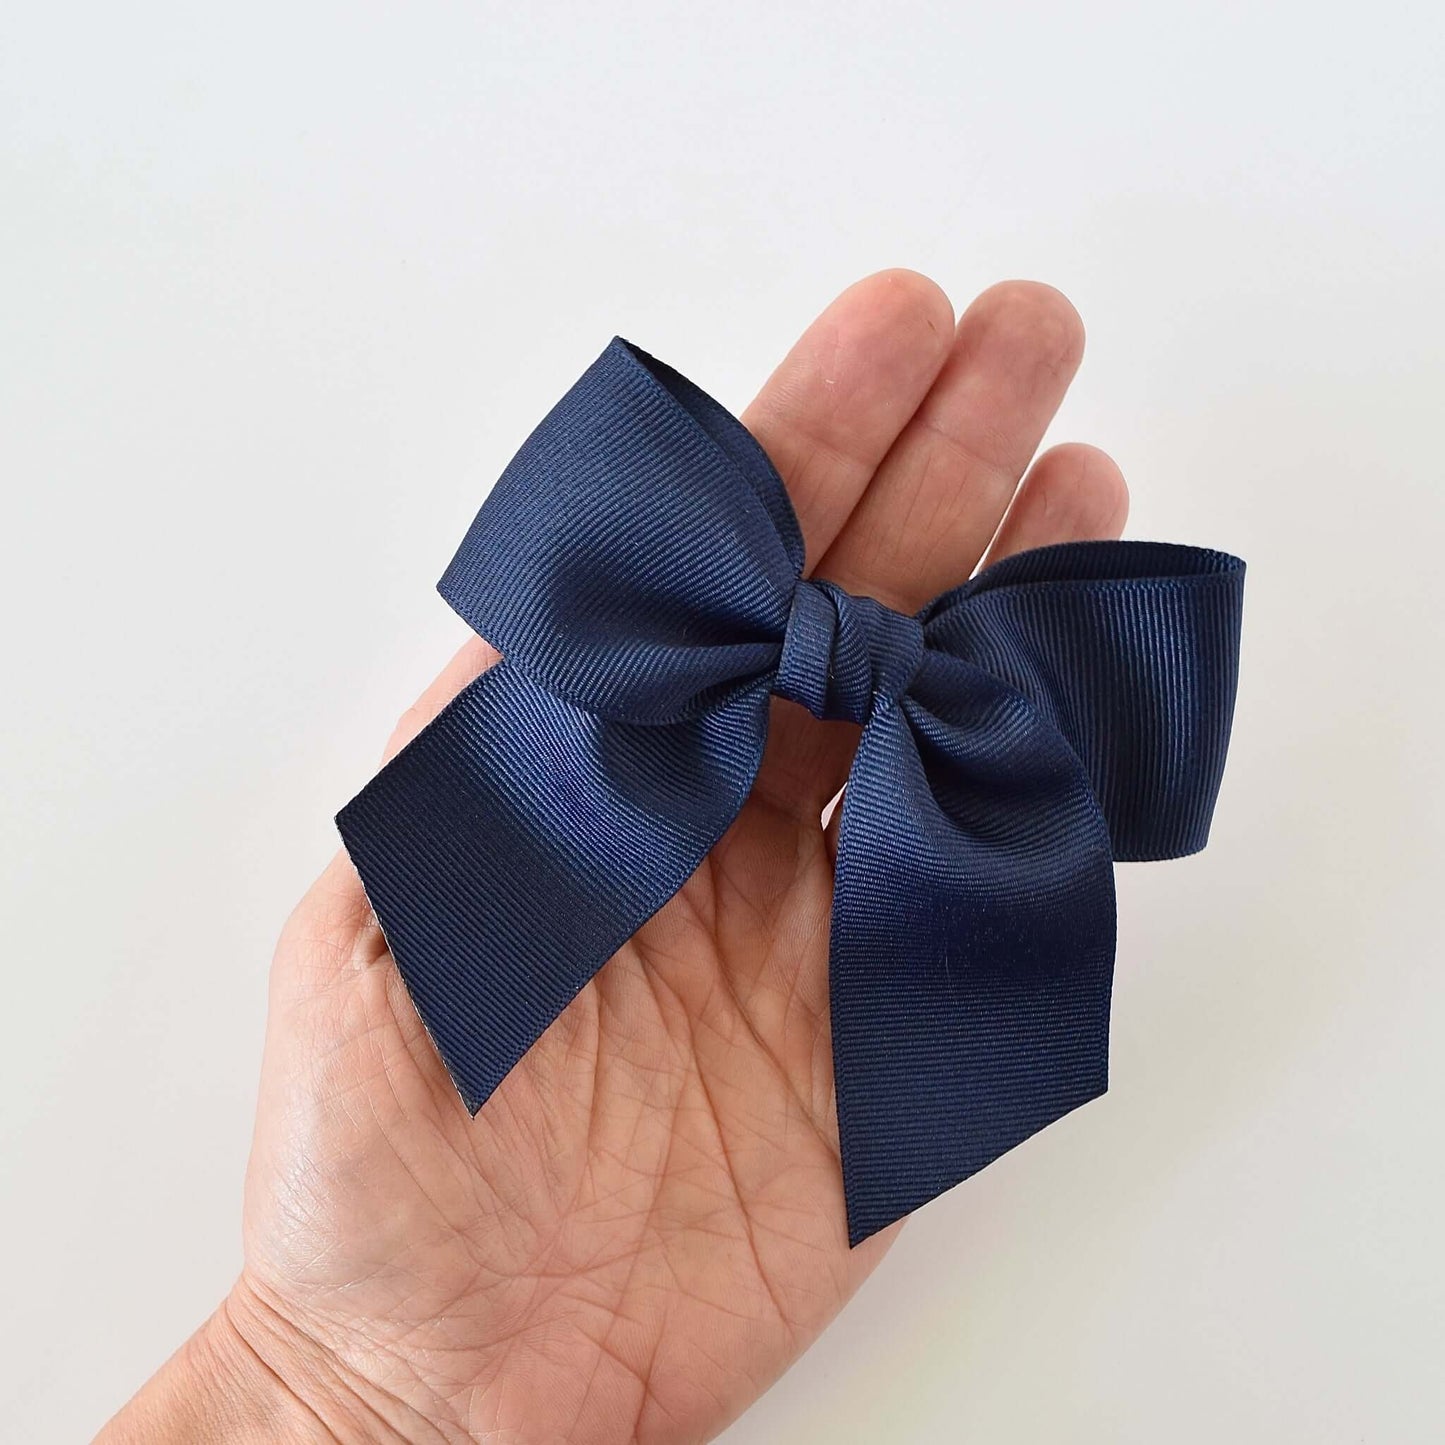 Hand holding a navy grosgrain sailor bow in neutral tones for toddlers and girls. Stylish hair accessory available with alligator clip or barrette.